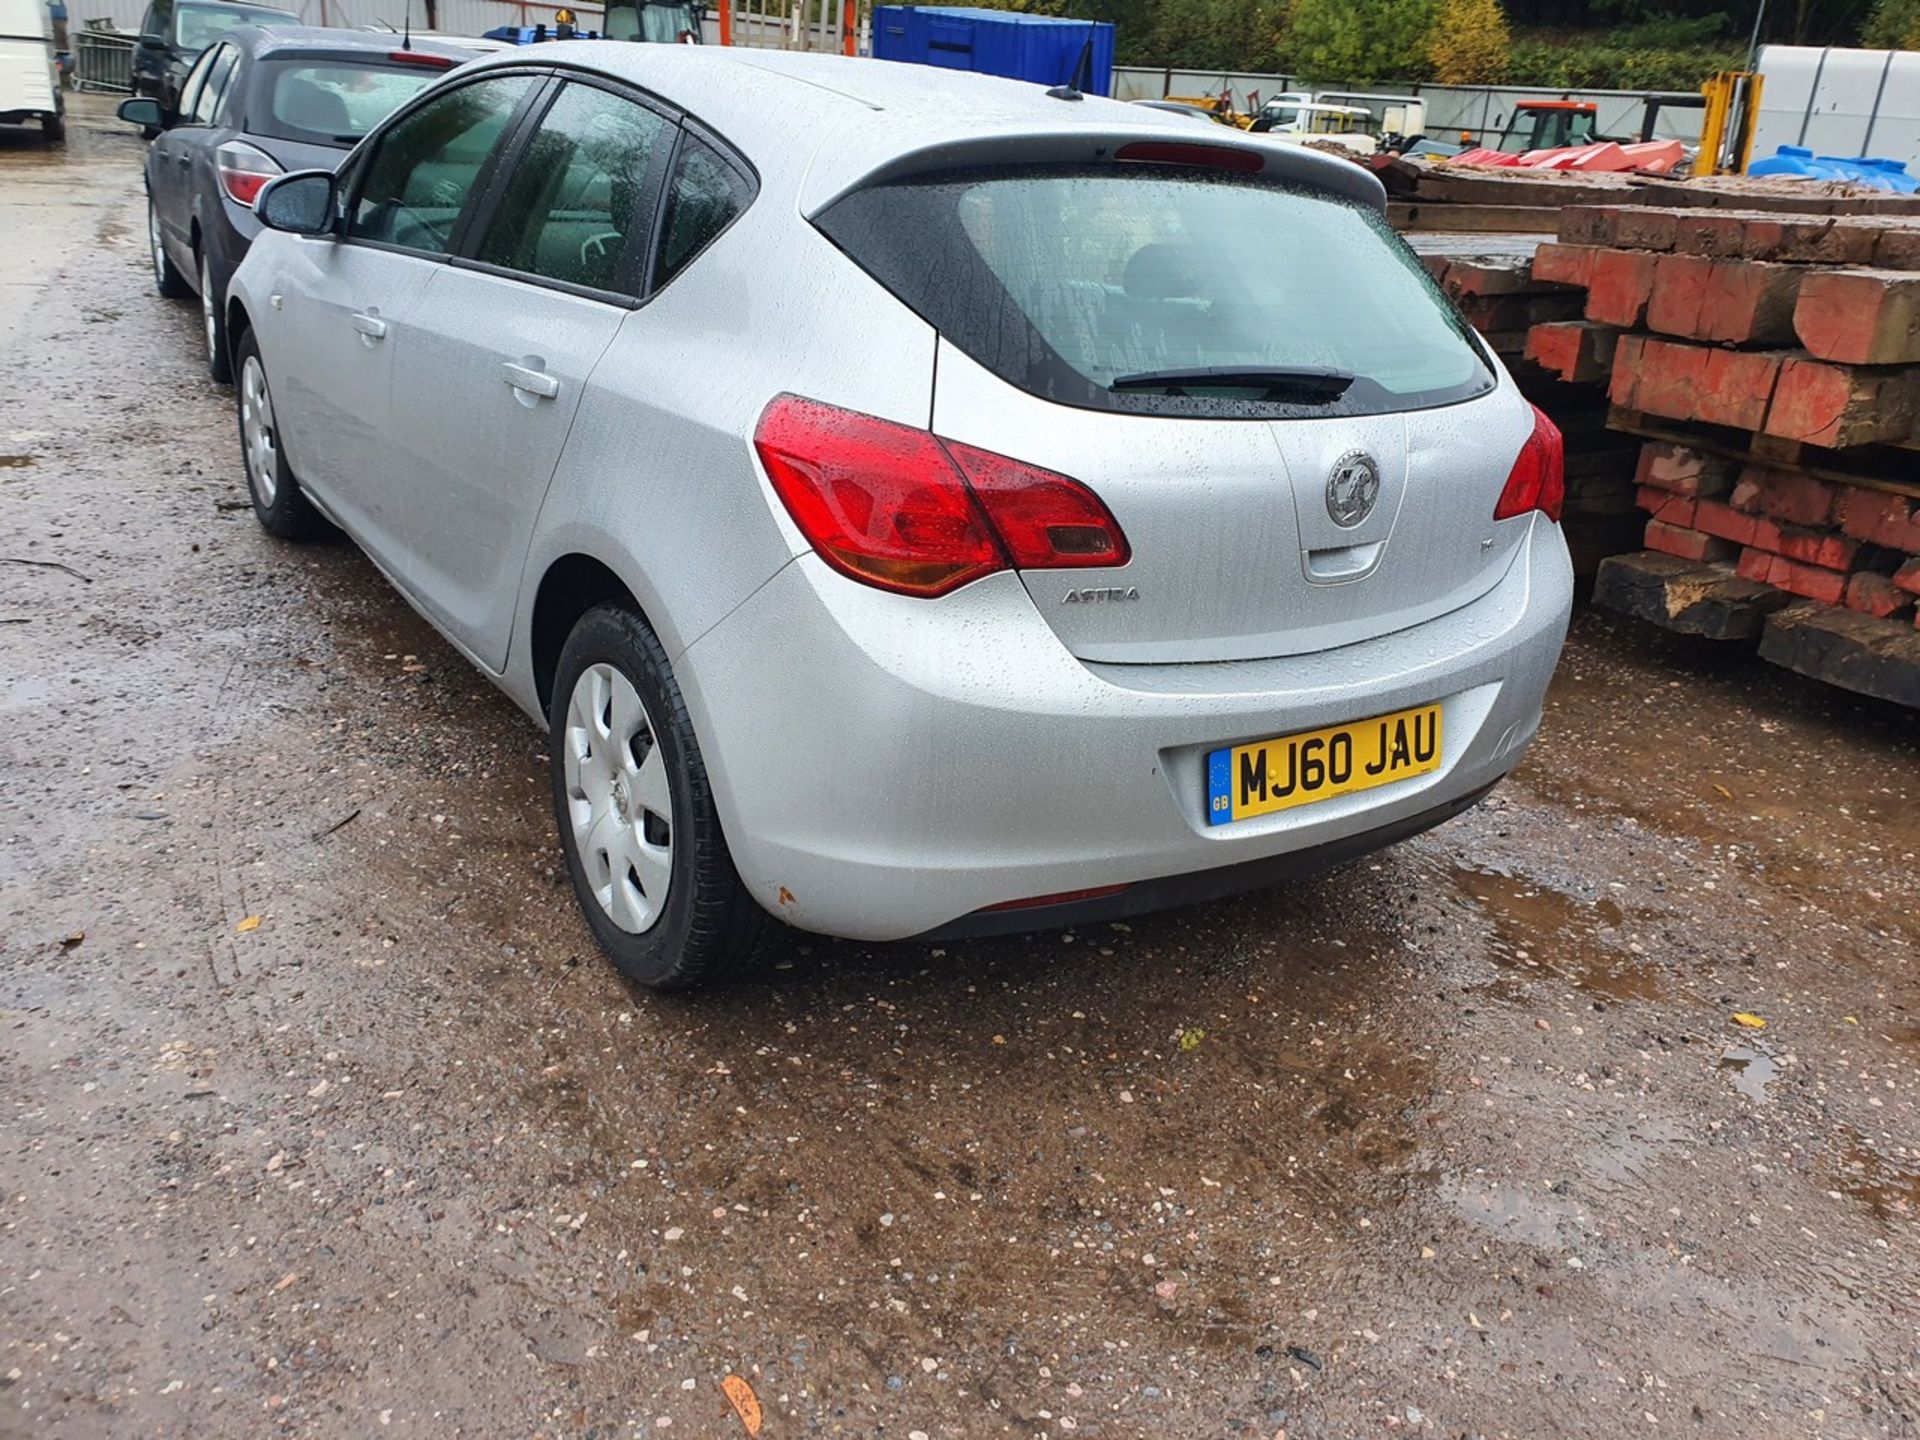 10/60 VAUXHALL ASTRA EXCLUSIV 113 - 1598cc 5dr Hatchback (Silver, 58k) - Image 13 of 23